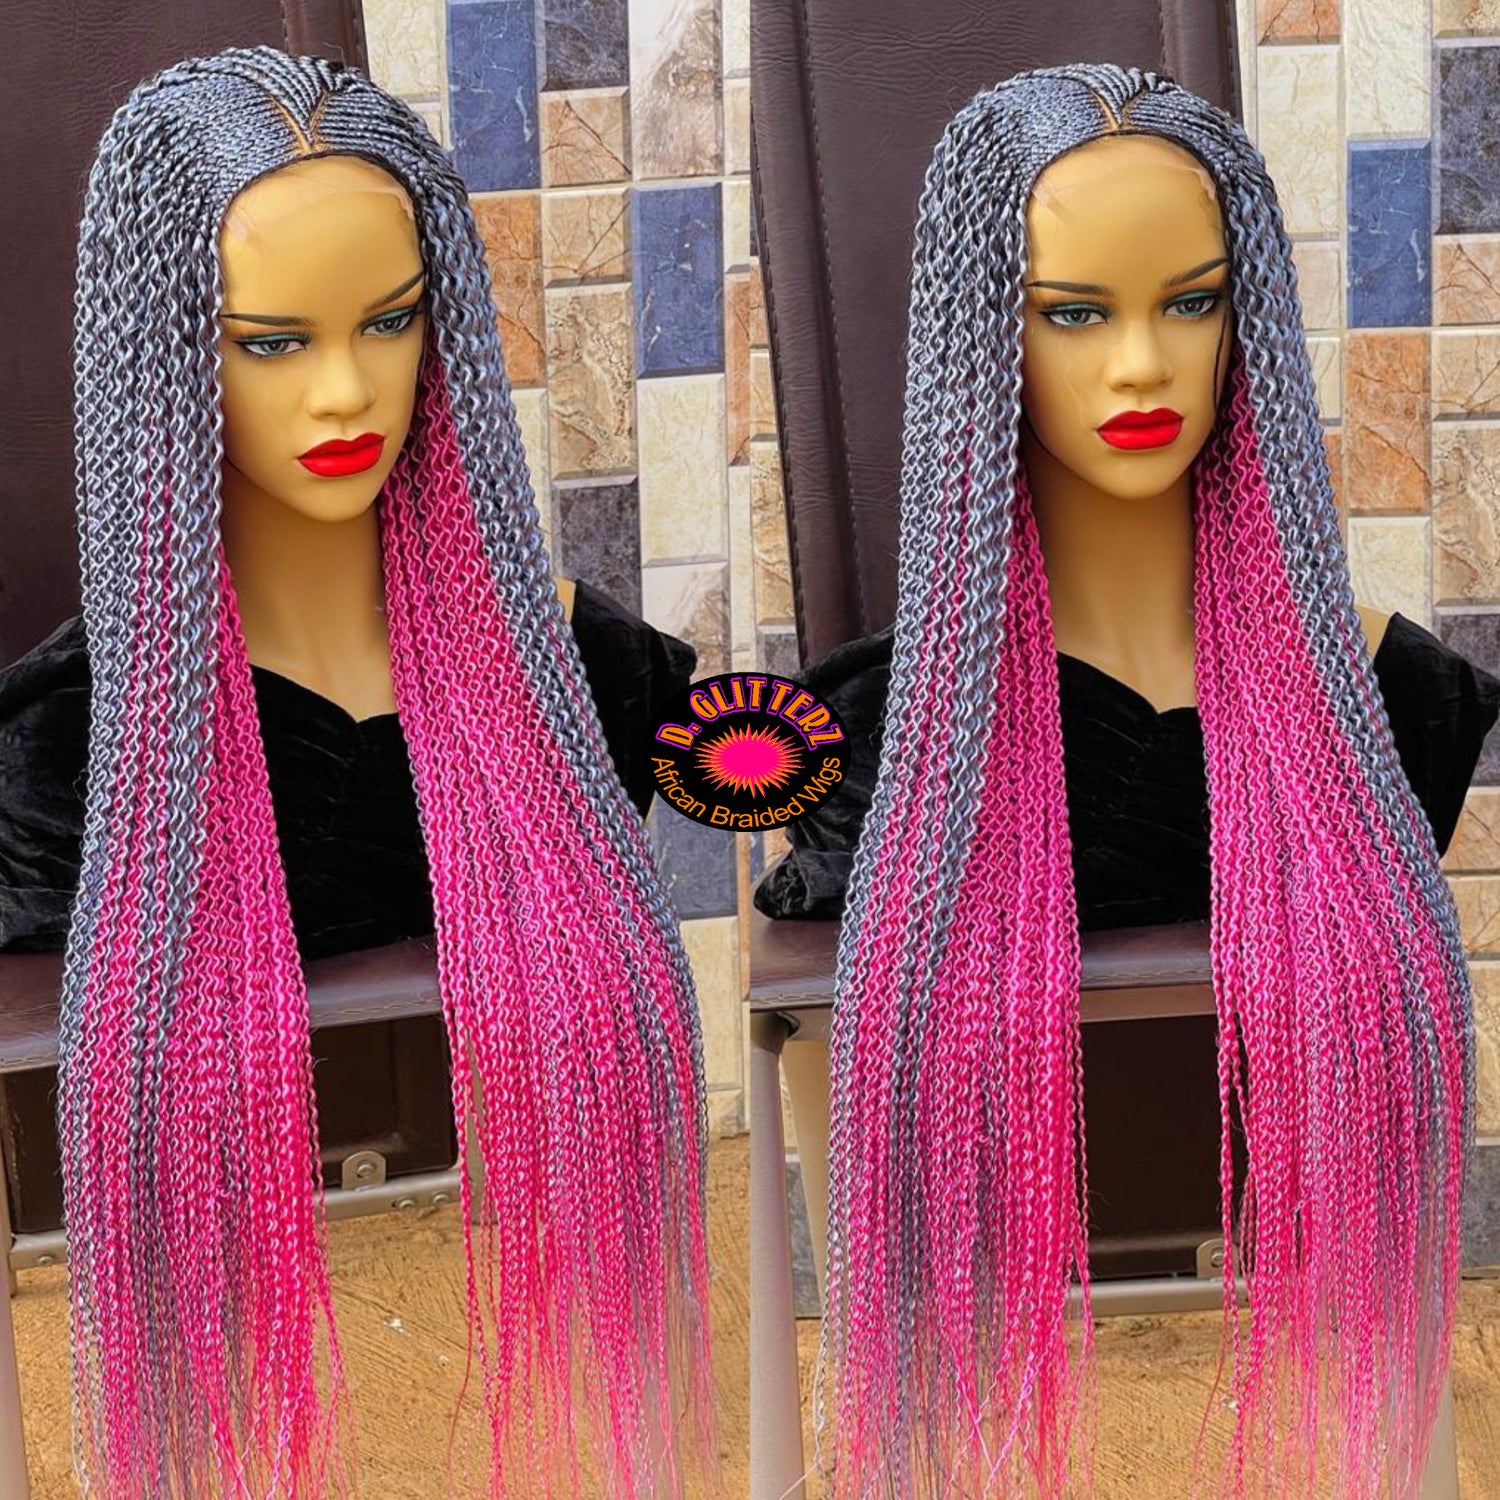 TWO TONES WATERMELON BRAIDED WIG